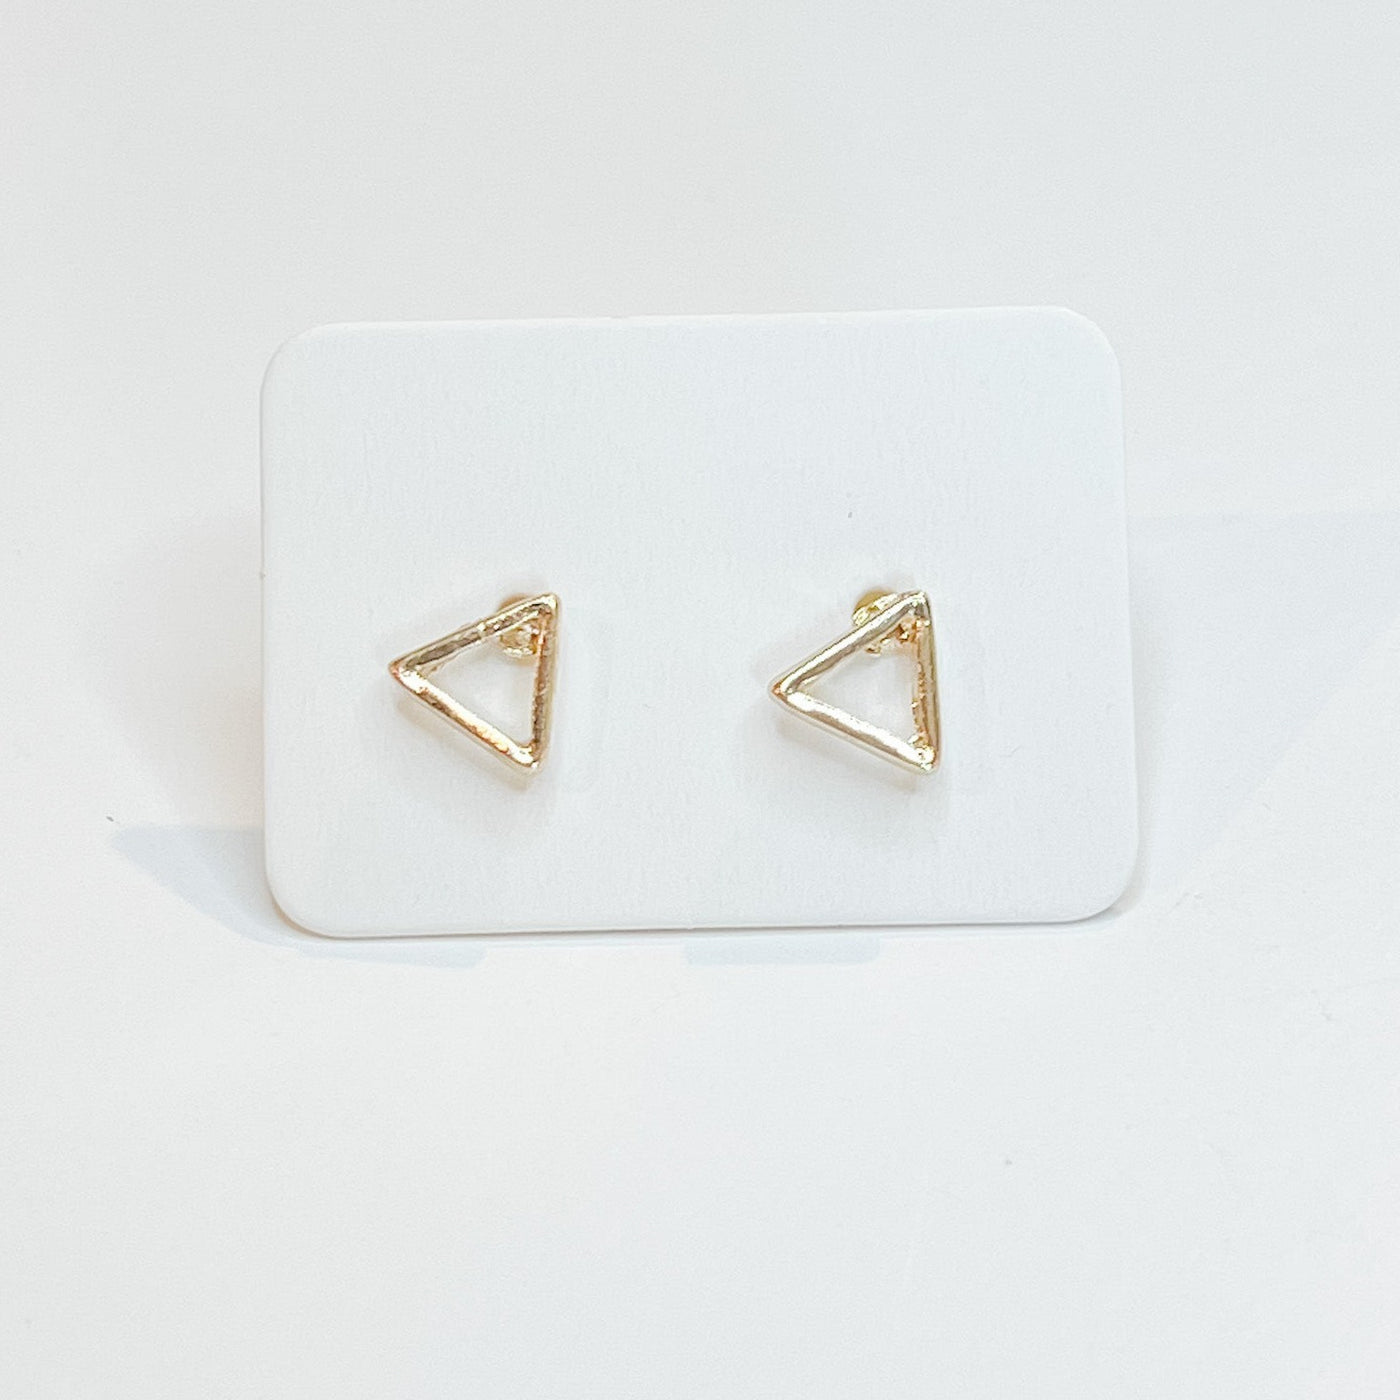 Earrings, Gold Triangle - Danshire Market and Design 